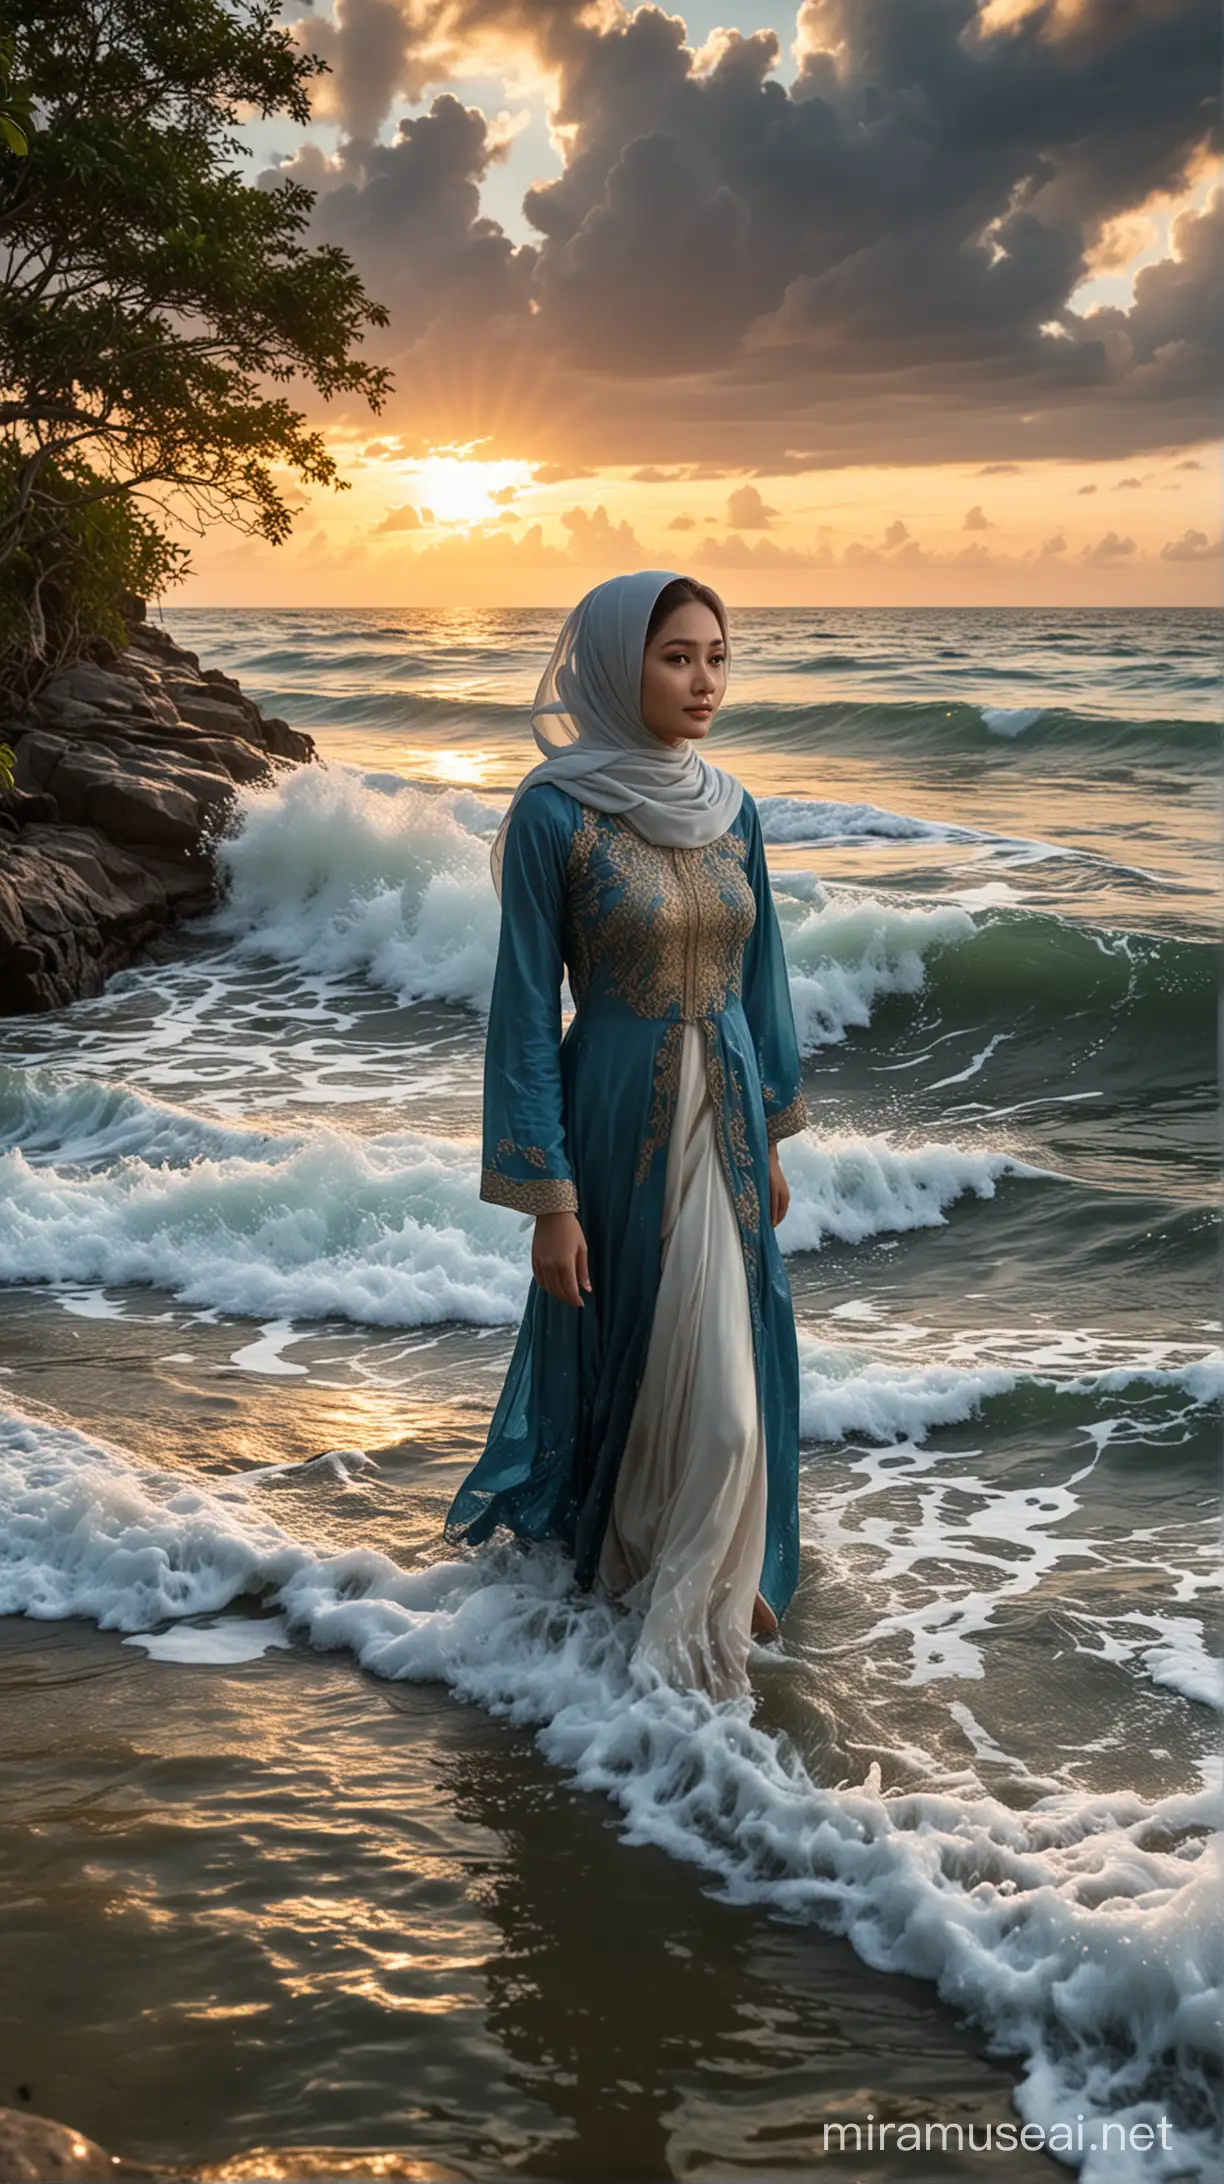 Underwater Photography Malaysian Girl in Hijab with Floating Dress amidst Big Waves at Sunset